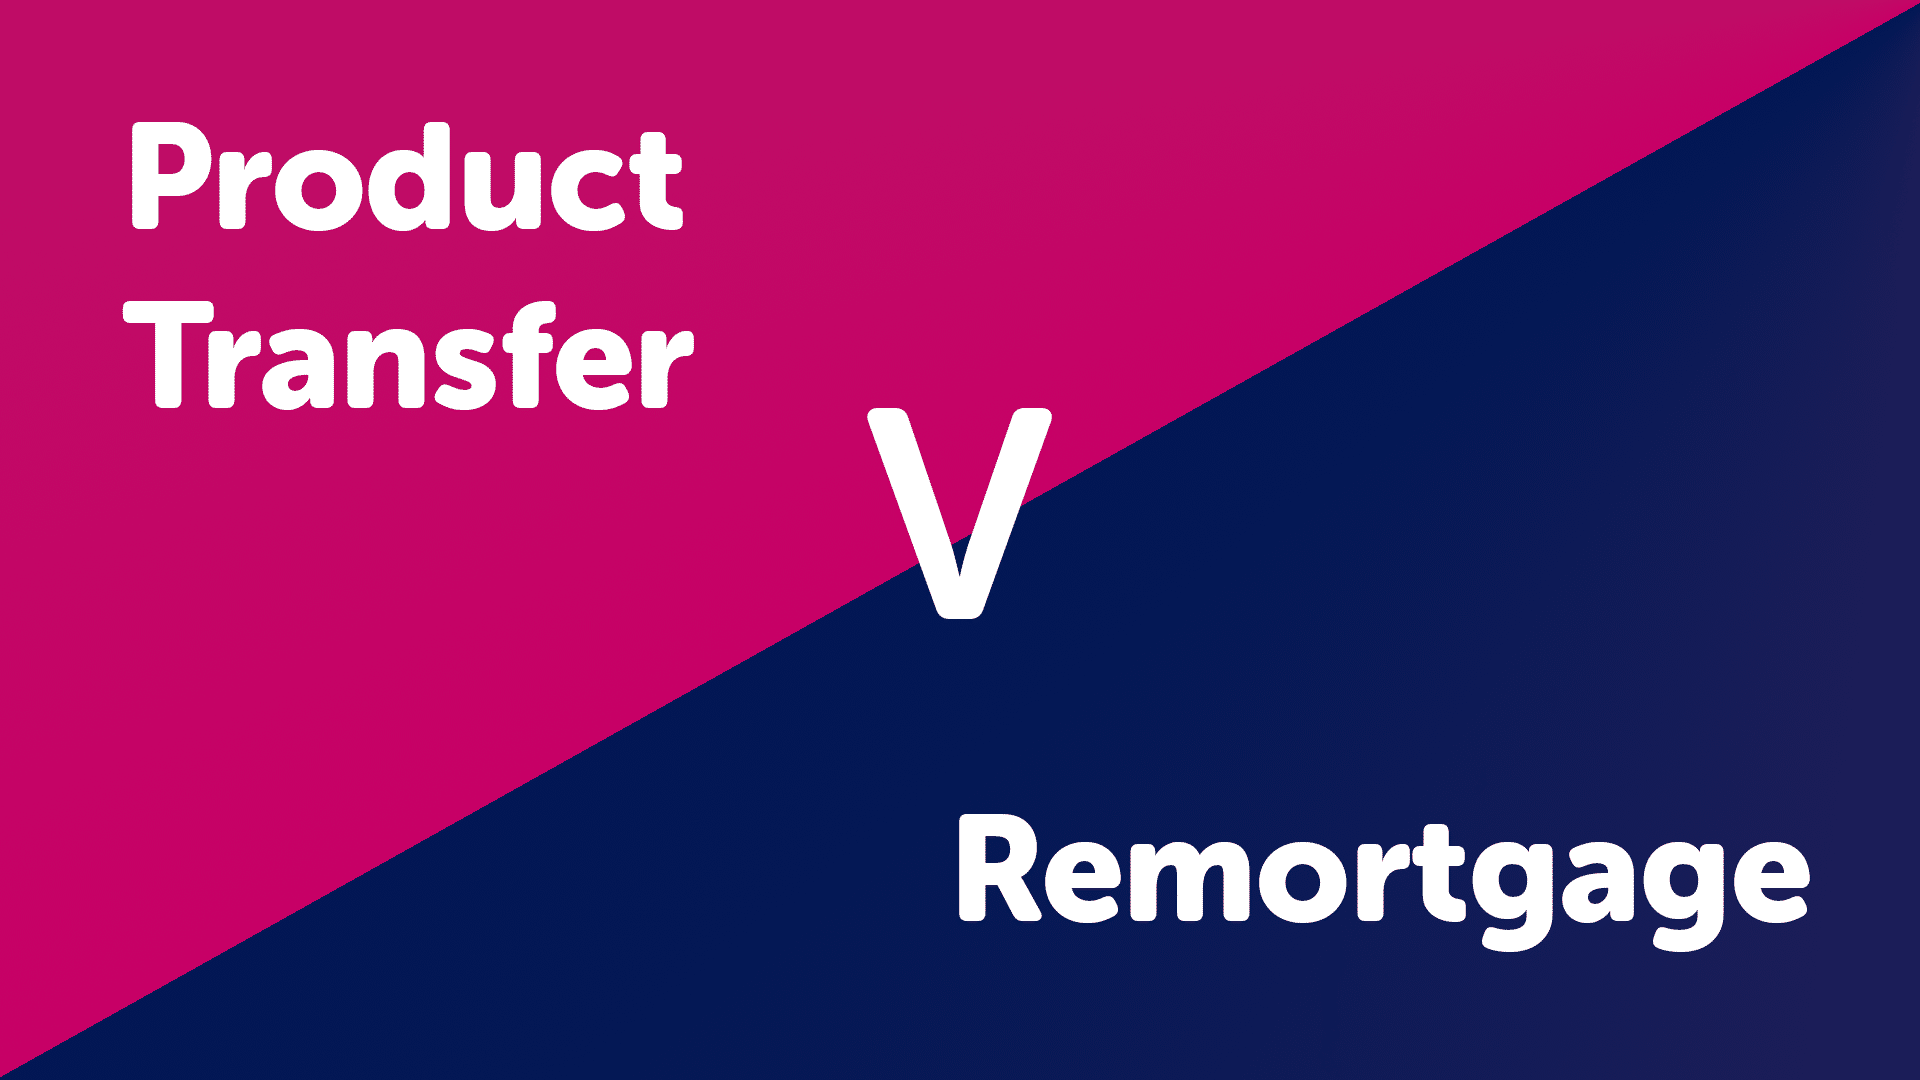 Mortgage Product Transfer V Remortgaging